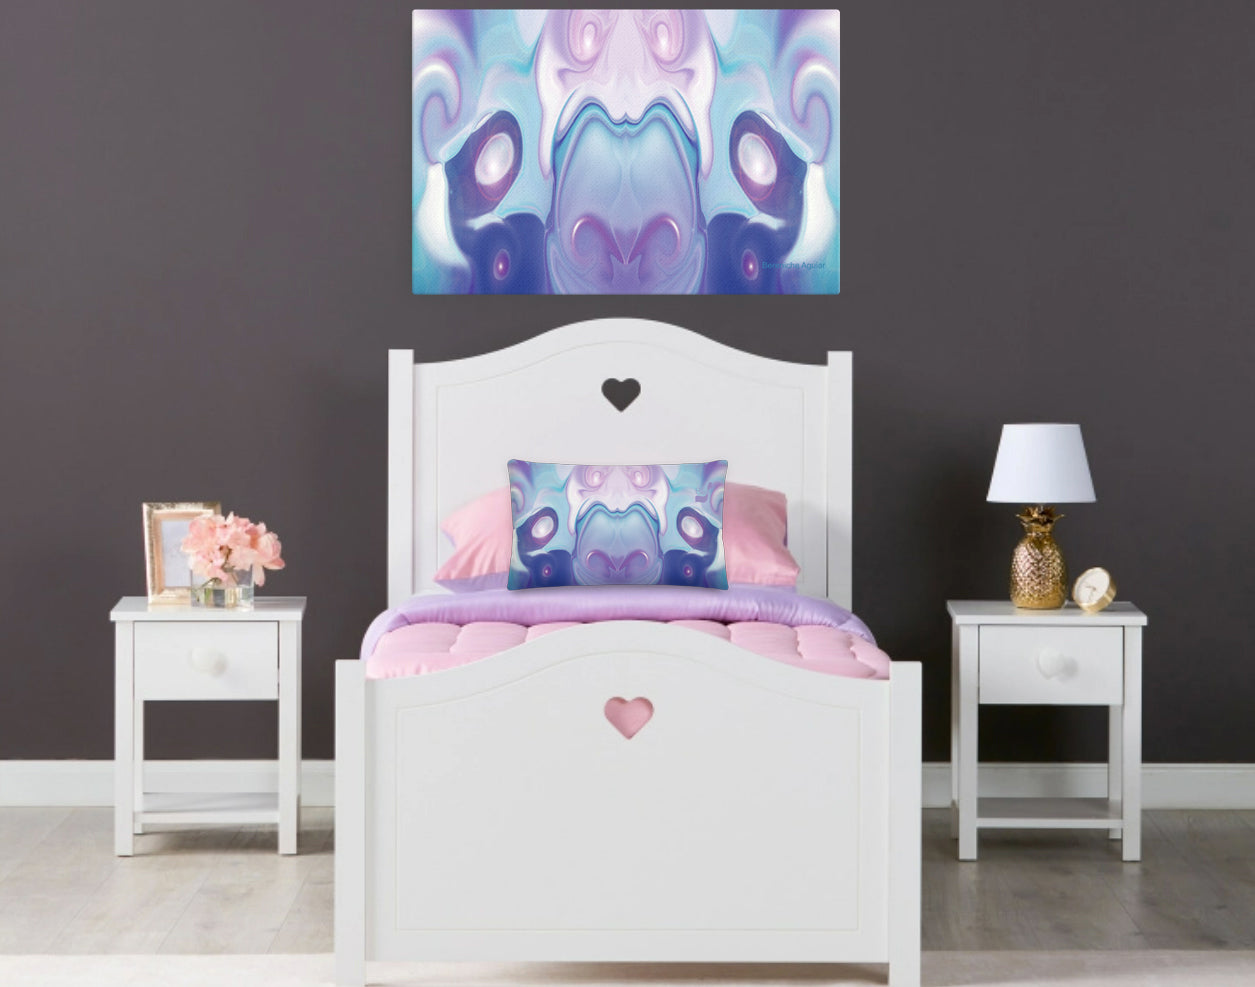 Space Elephant BeSculpt Kids Abstract Wall Art on Canvas No. 2